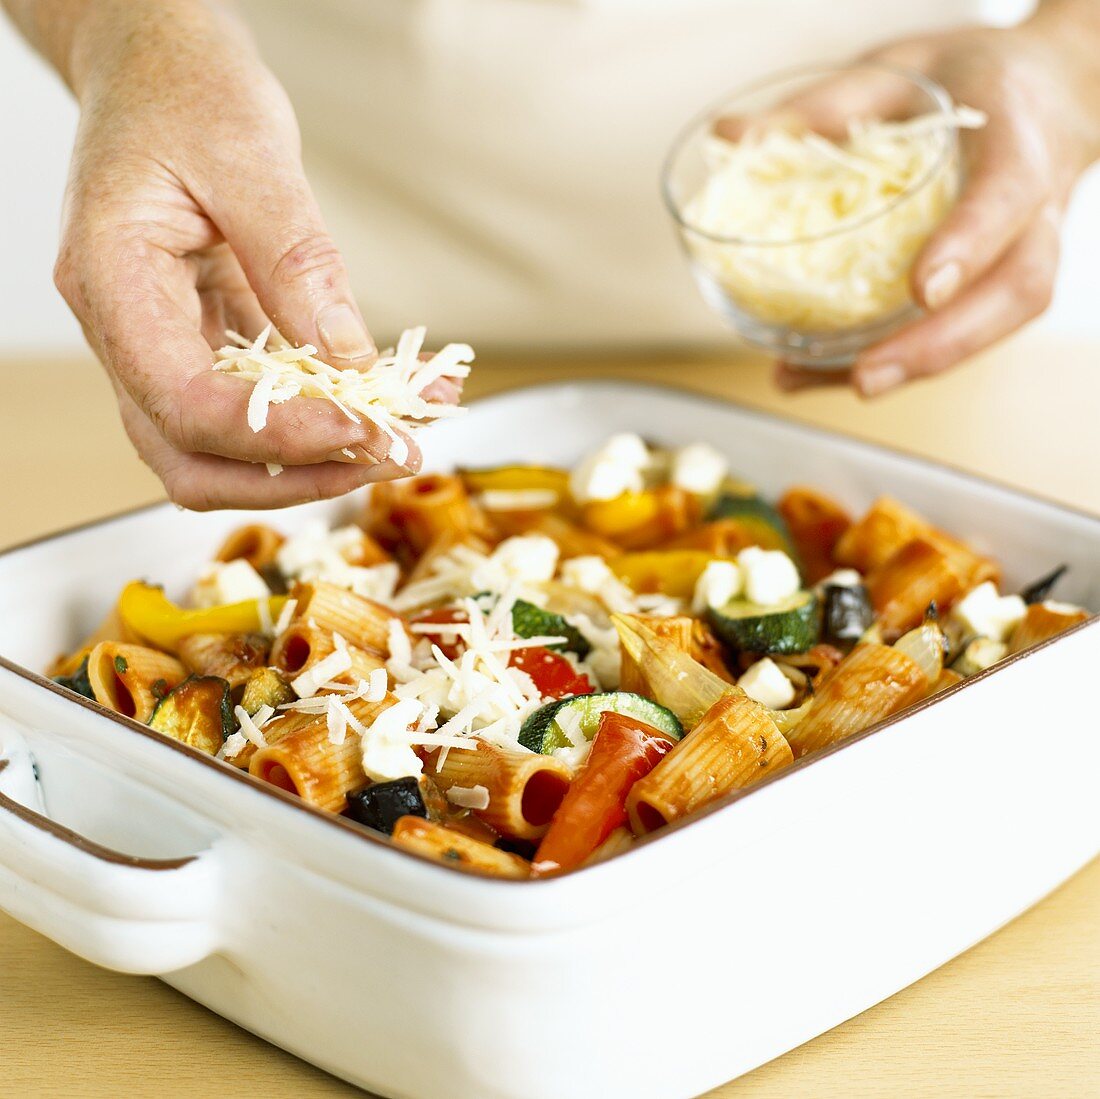 Sprinkling cheese over pasta and vegetable bake